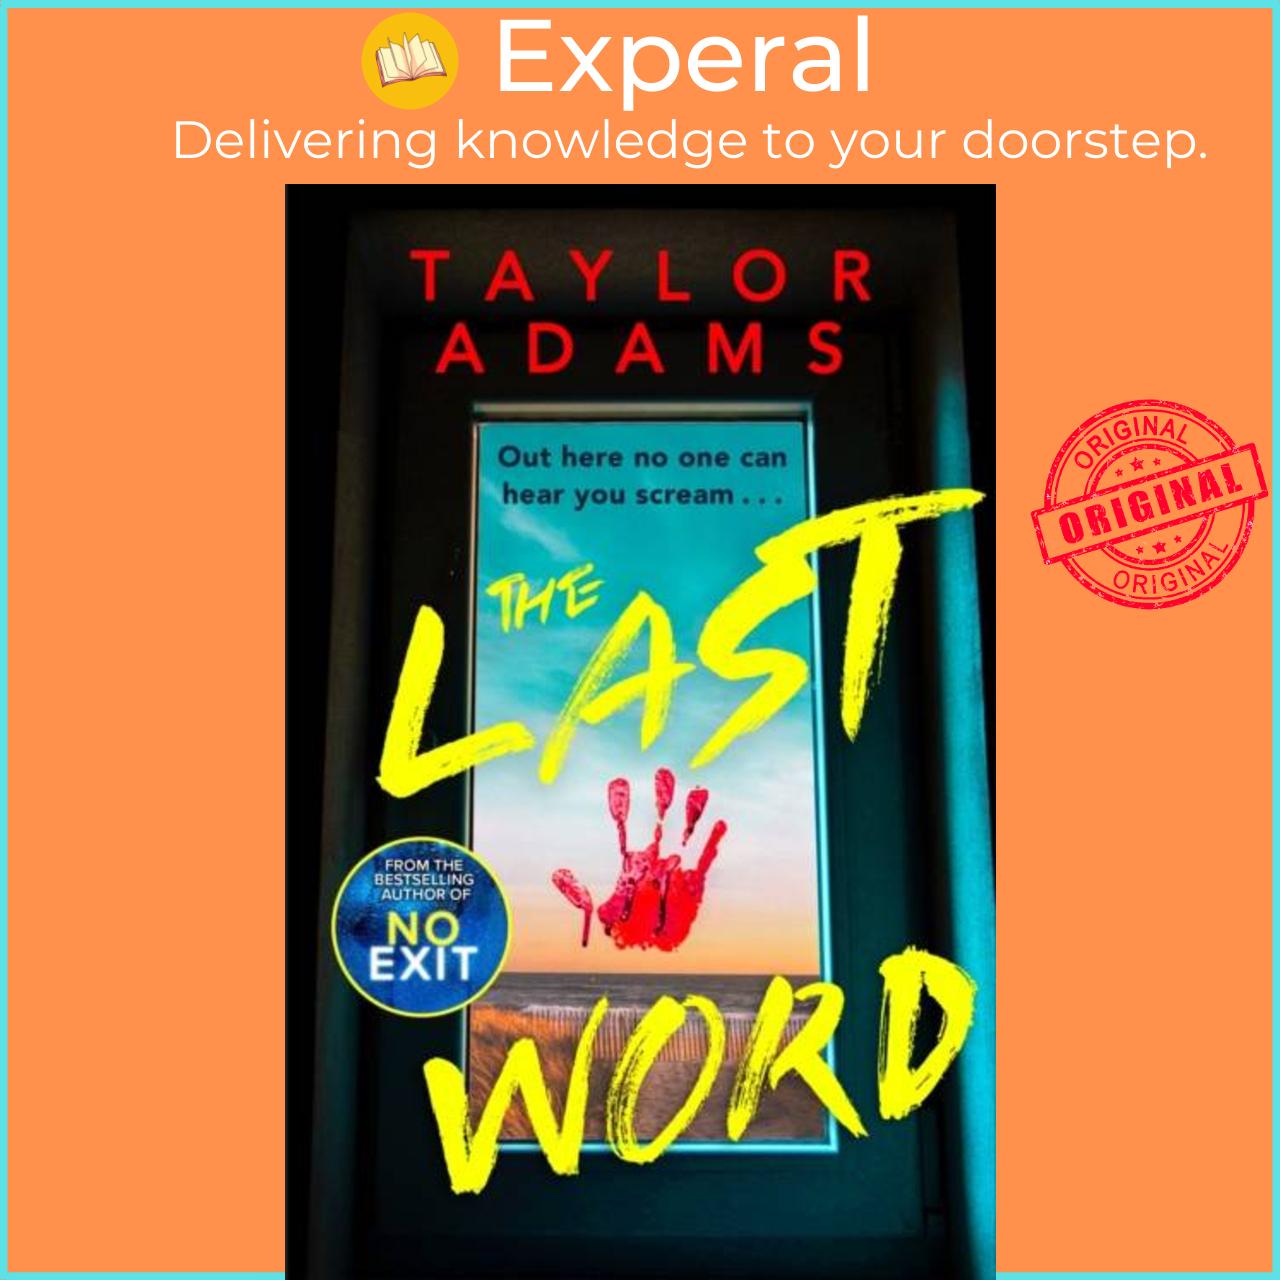 Sách - The Last Word - an utterly addictive and spine-chilling suspense thriller by Taylor Adams (UK edition, paperback)